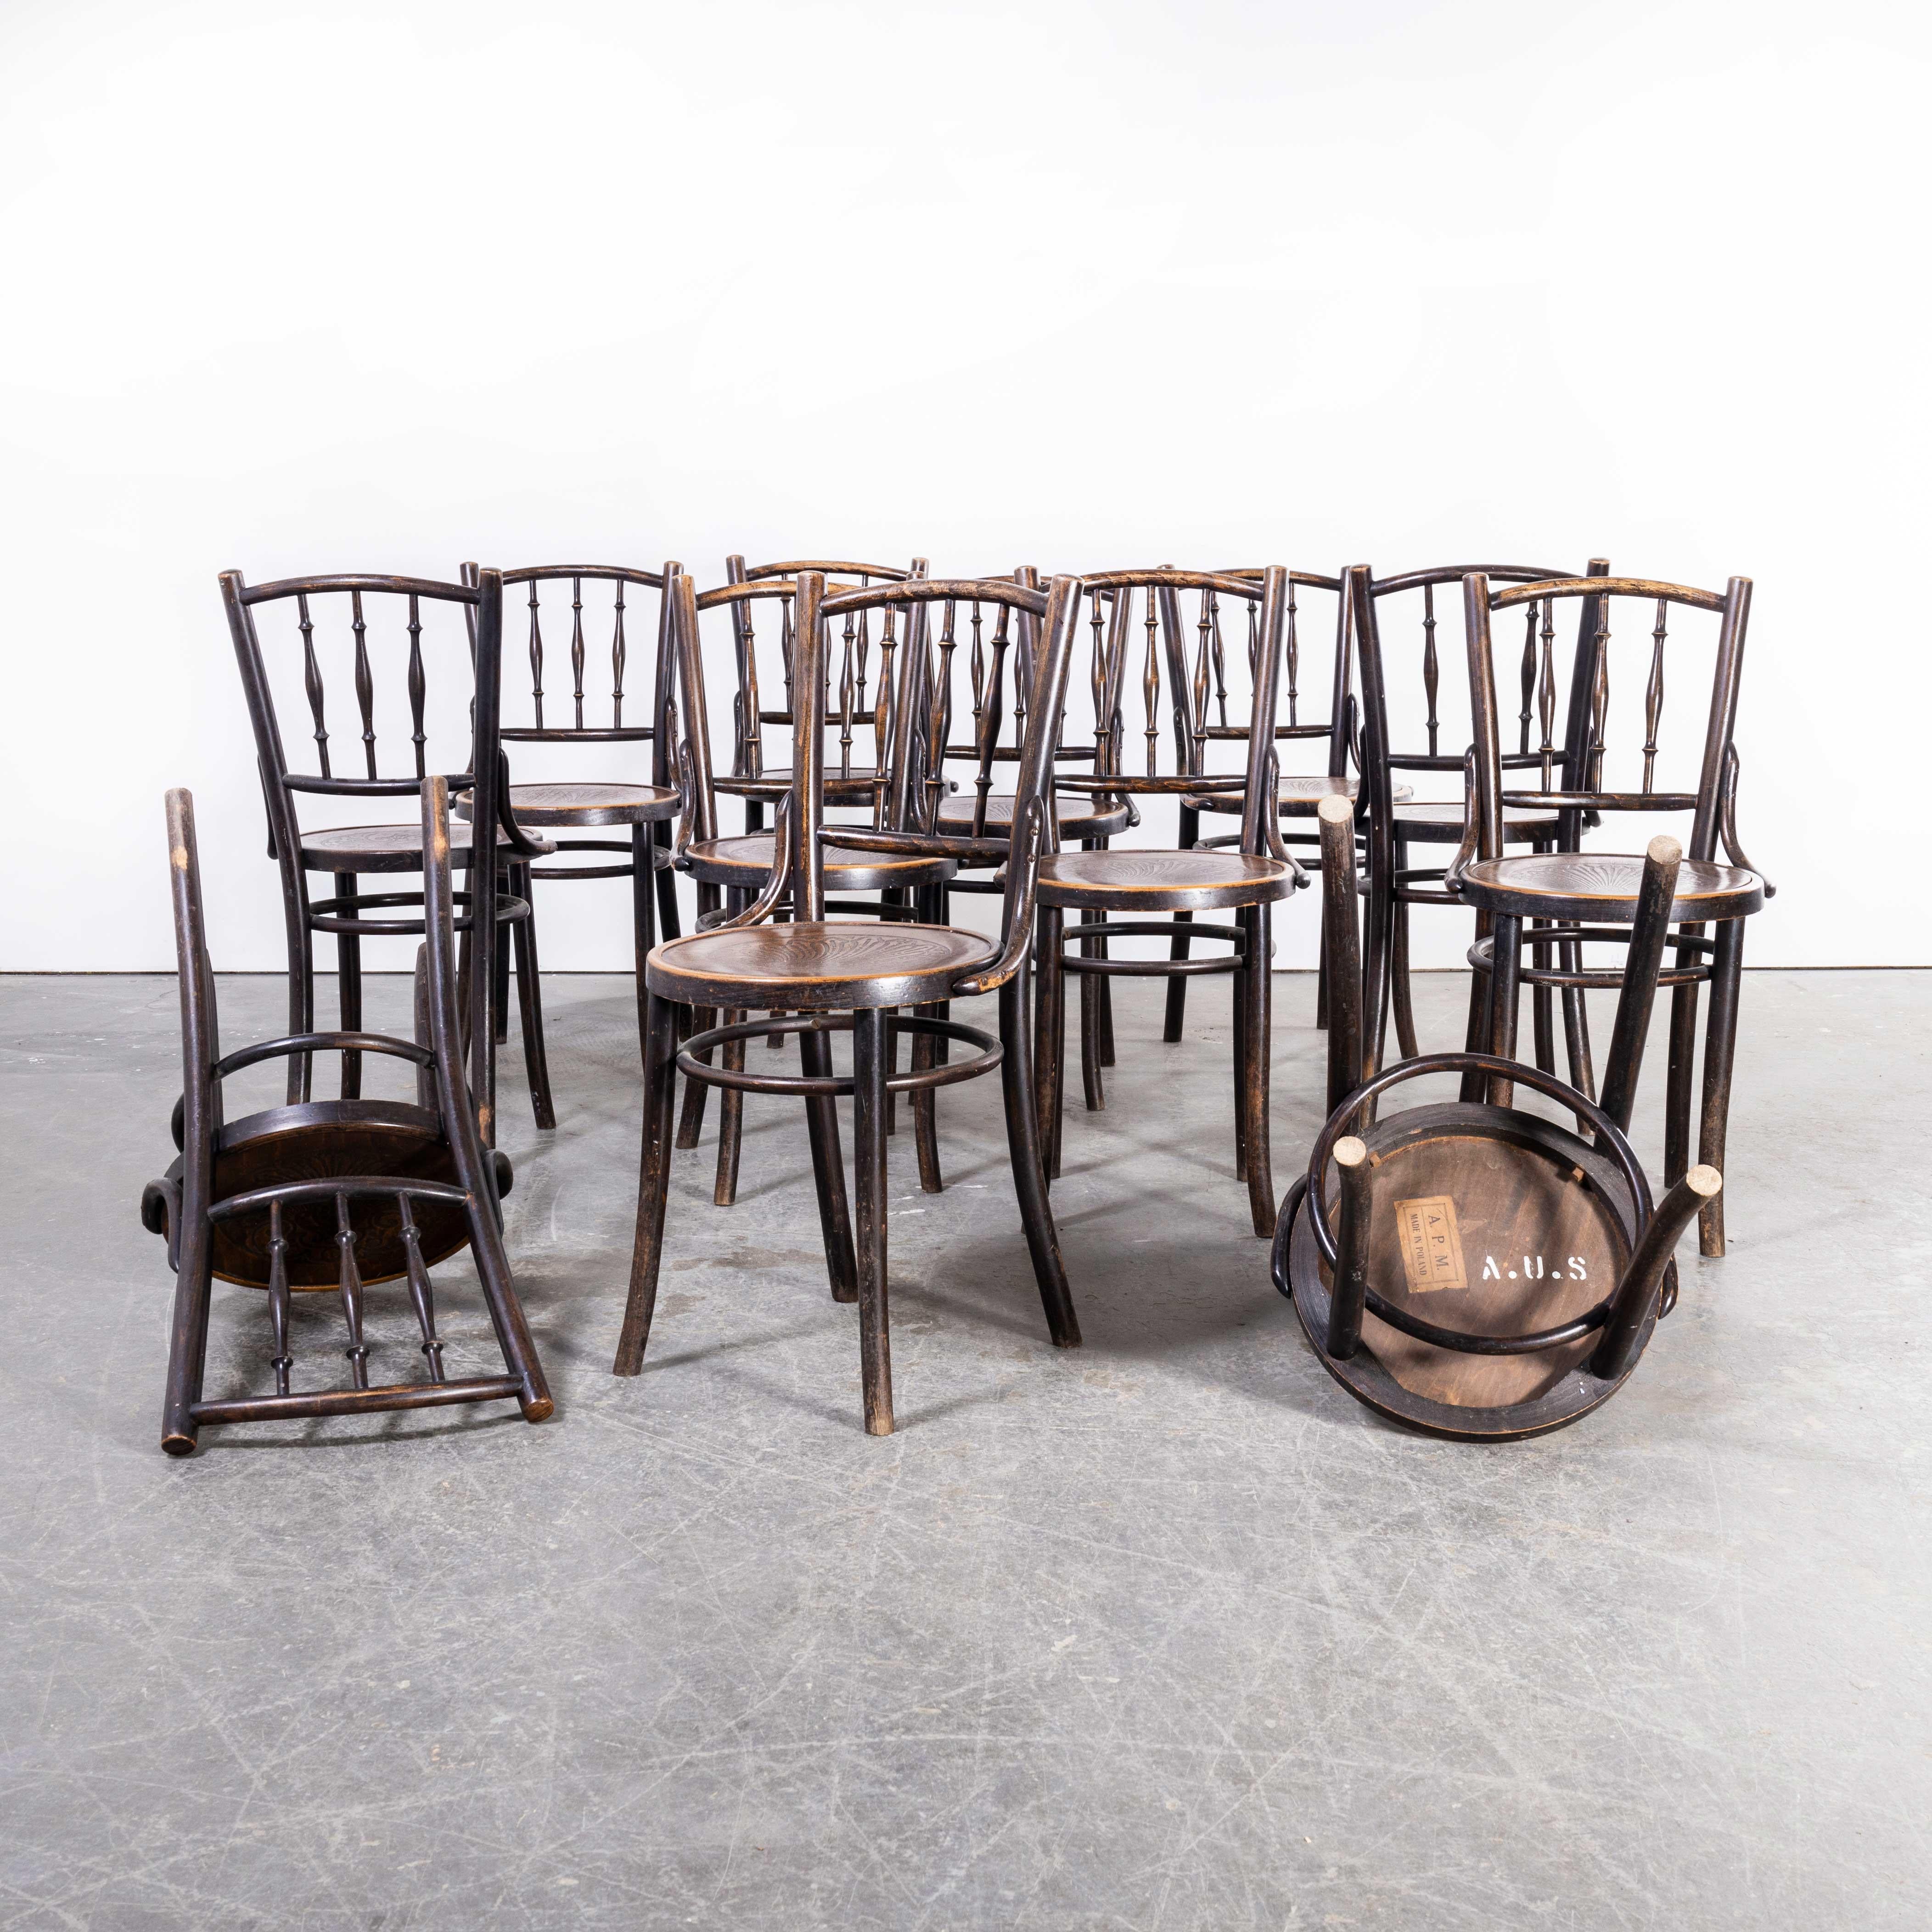 1950’s Dark Oak Bentwood Chairs By APM Poland – Set Of Twelve
1950’s Dark Oak Bentwood Chairs By APM Poland – Set Of Twelve. Classic set of stunning bentwood dining chairs by APM Poland. Sadly little is now known about this factory but it was on of